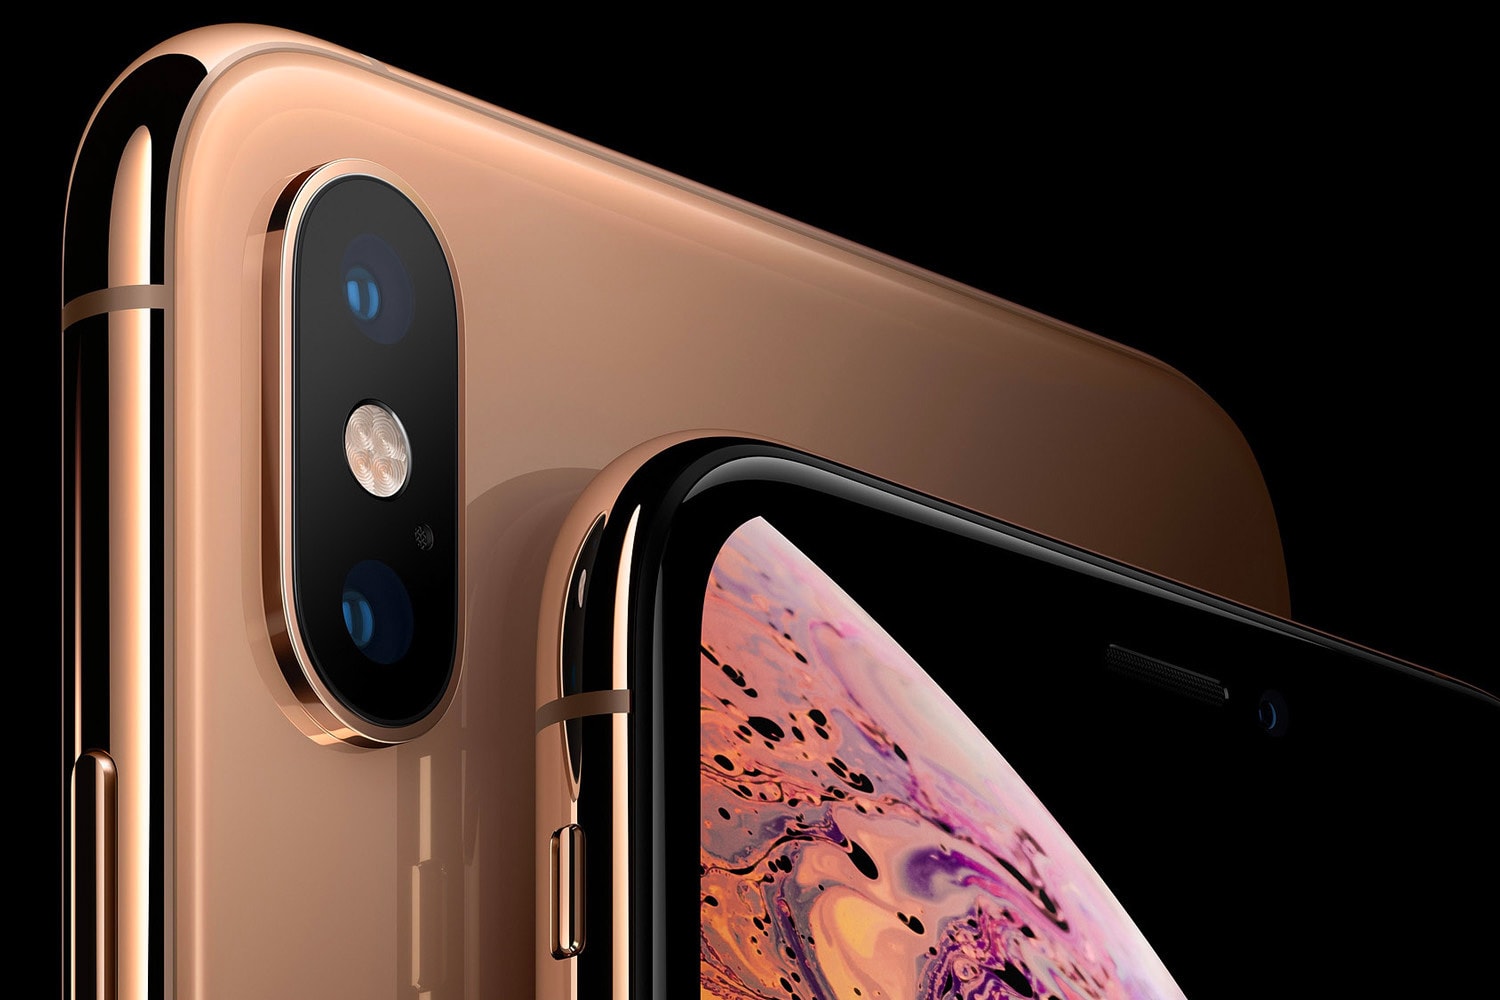 Apple Launching First 5G iPhone in 2020 intel chip 2019 network smartphone apple rumors at&t qualcomm 